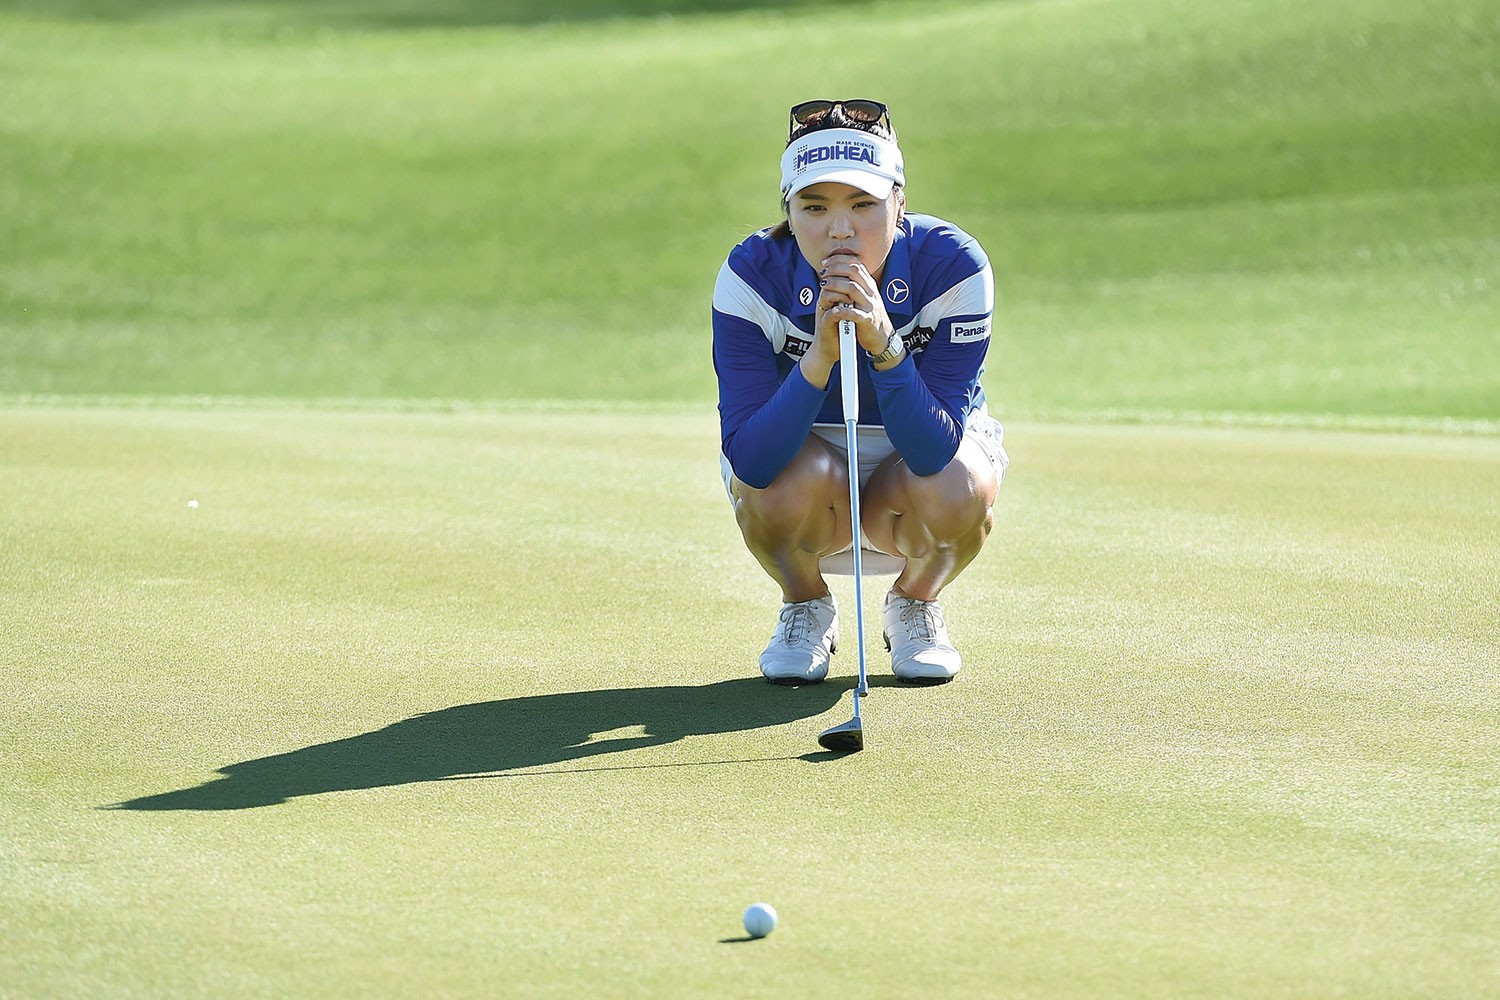 Ryu focused on putting to improve her scores, with help from Ian Baker-Finch [inset].